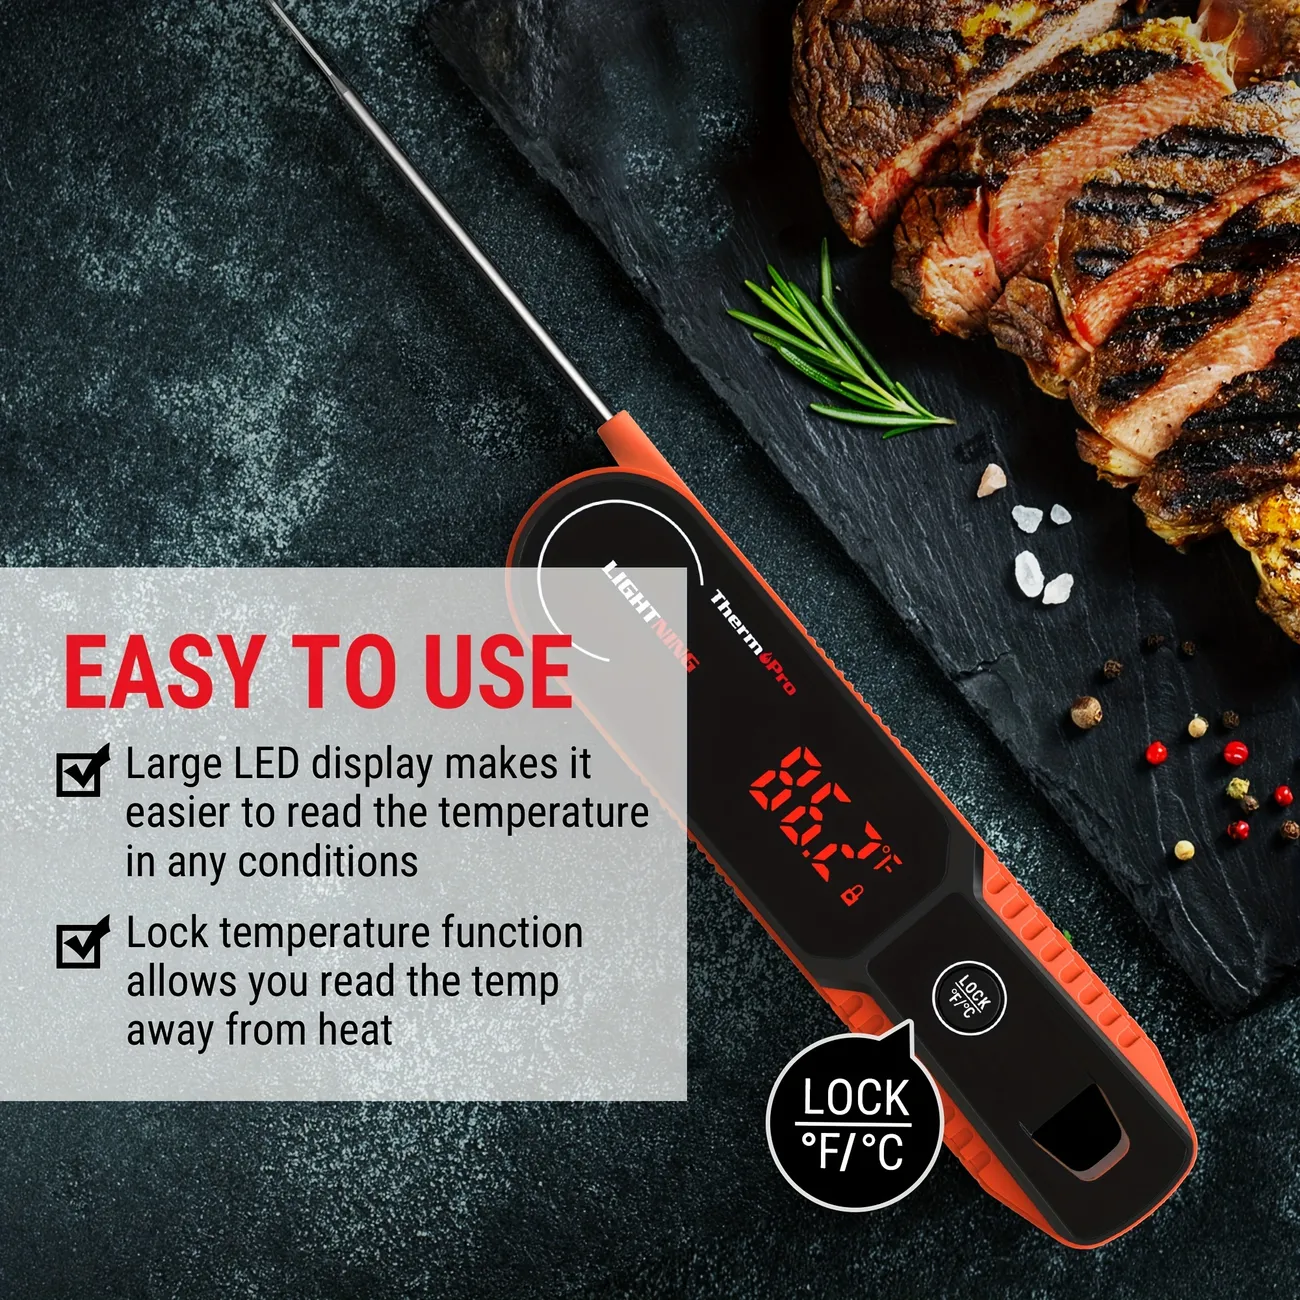 Hermopro Lightning One-second Instant Read Meat Thermometer Calibrated  Kitchen Food Thermometer With Smart Display Waterproof Cooking Thermometer  For Frying Smoker Grill Batteries Not Included - Temu Denmark